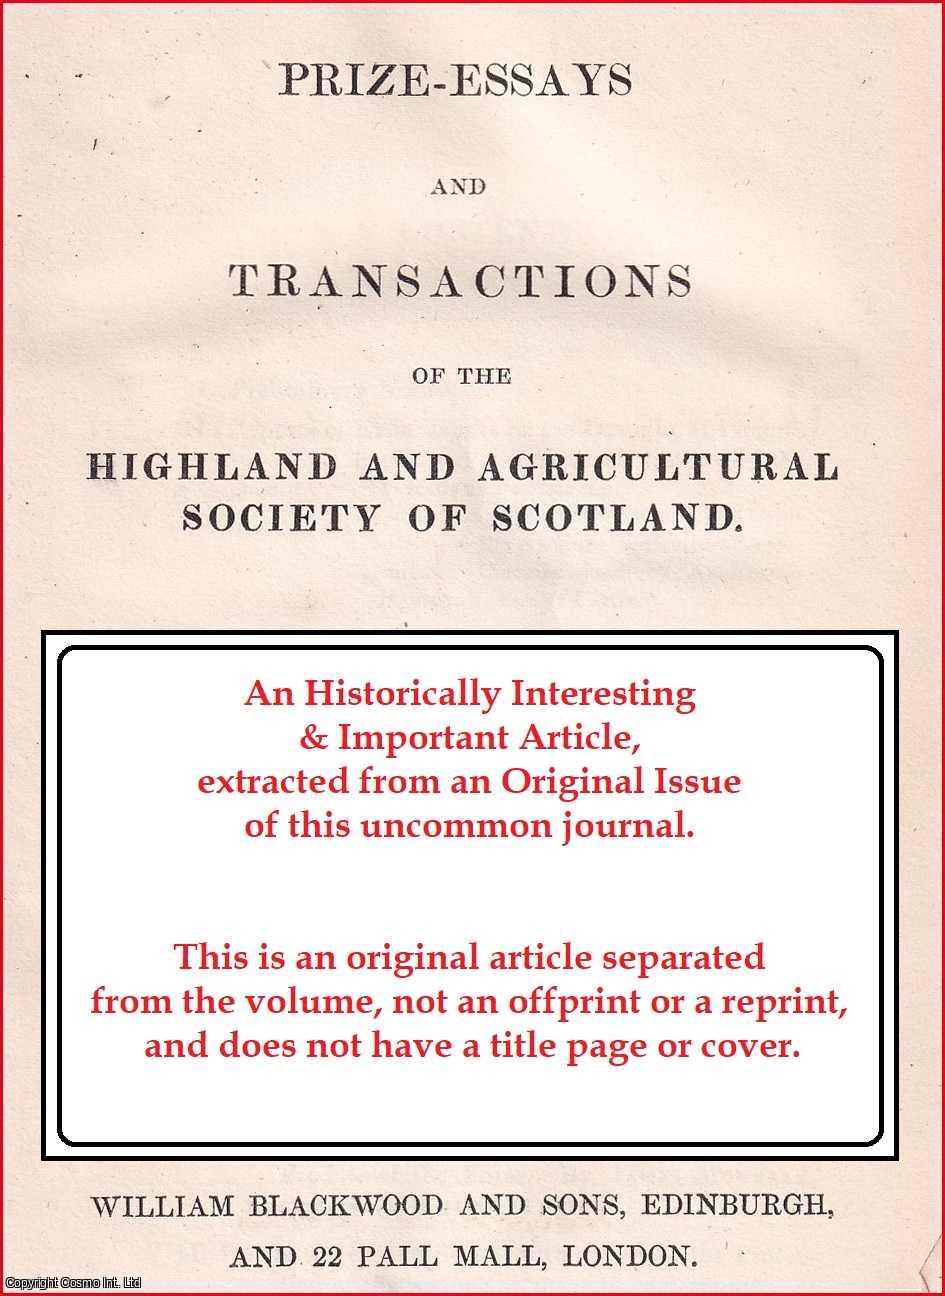 John Boswell, Esq. of Kingcausie. - The Improvement of the Farm of Swellhead, on the Estate of Kingcausie, Parish of Maryculter, & County of Kincardine. An uncommon original article from the Prize Essays and Transactions of the Highland Society of Scotland, 1843.